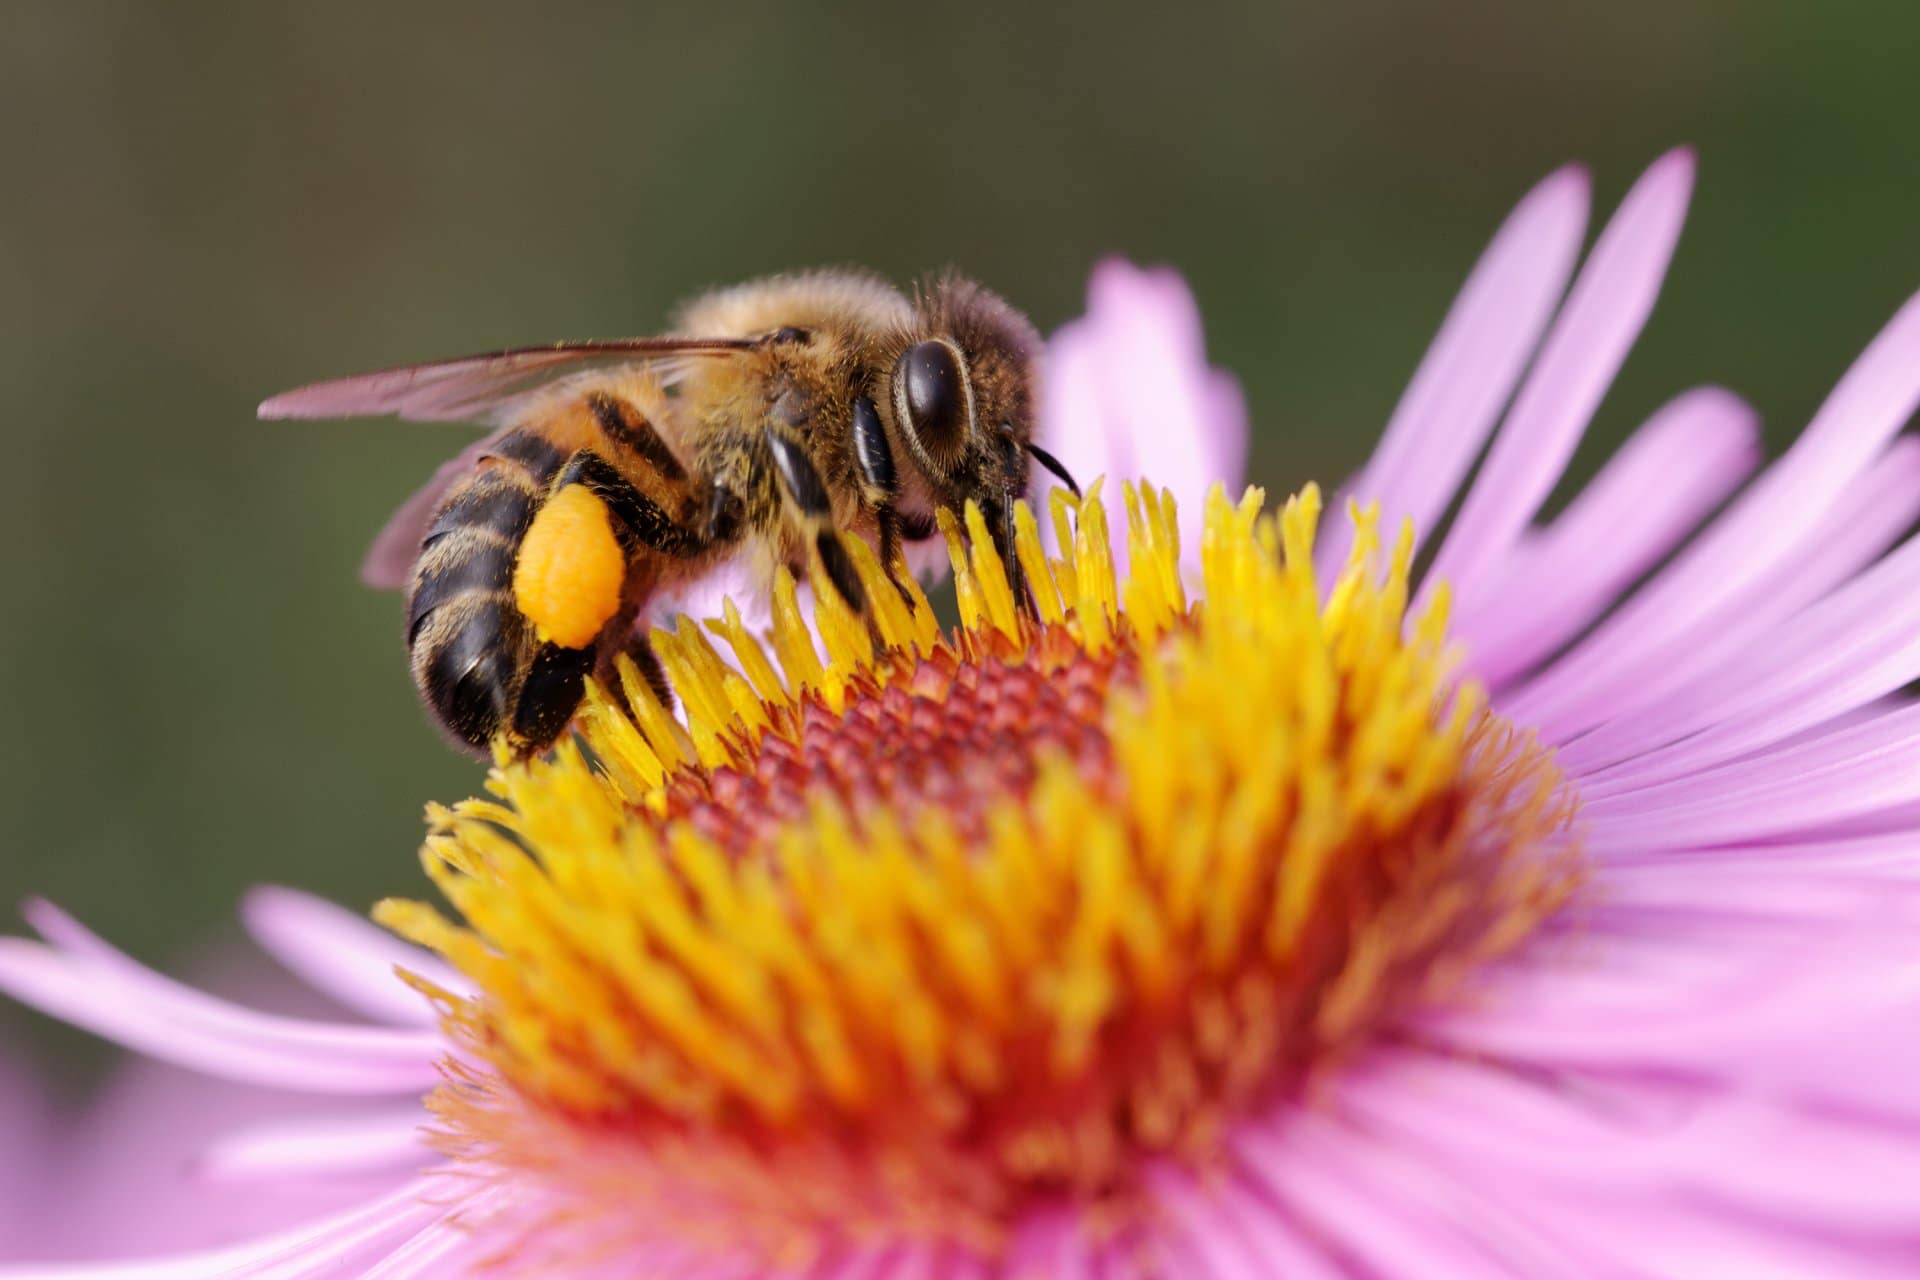 A bee pollinating a purple flower with a yellow center.